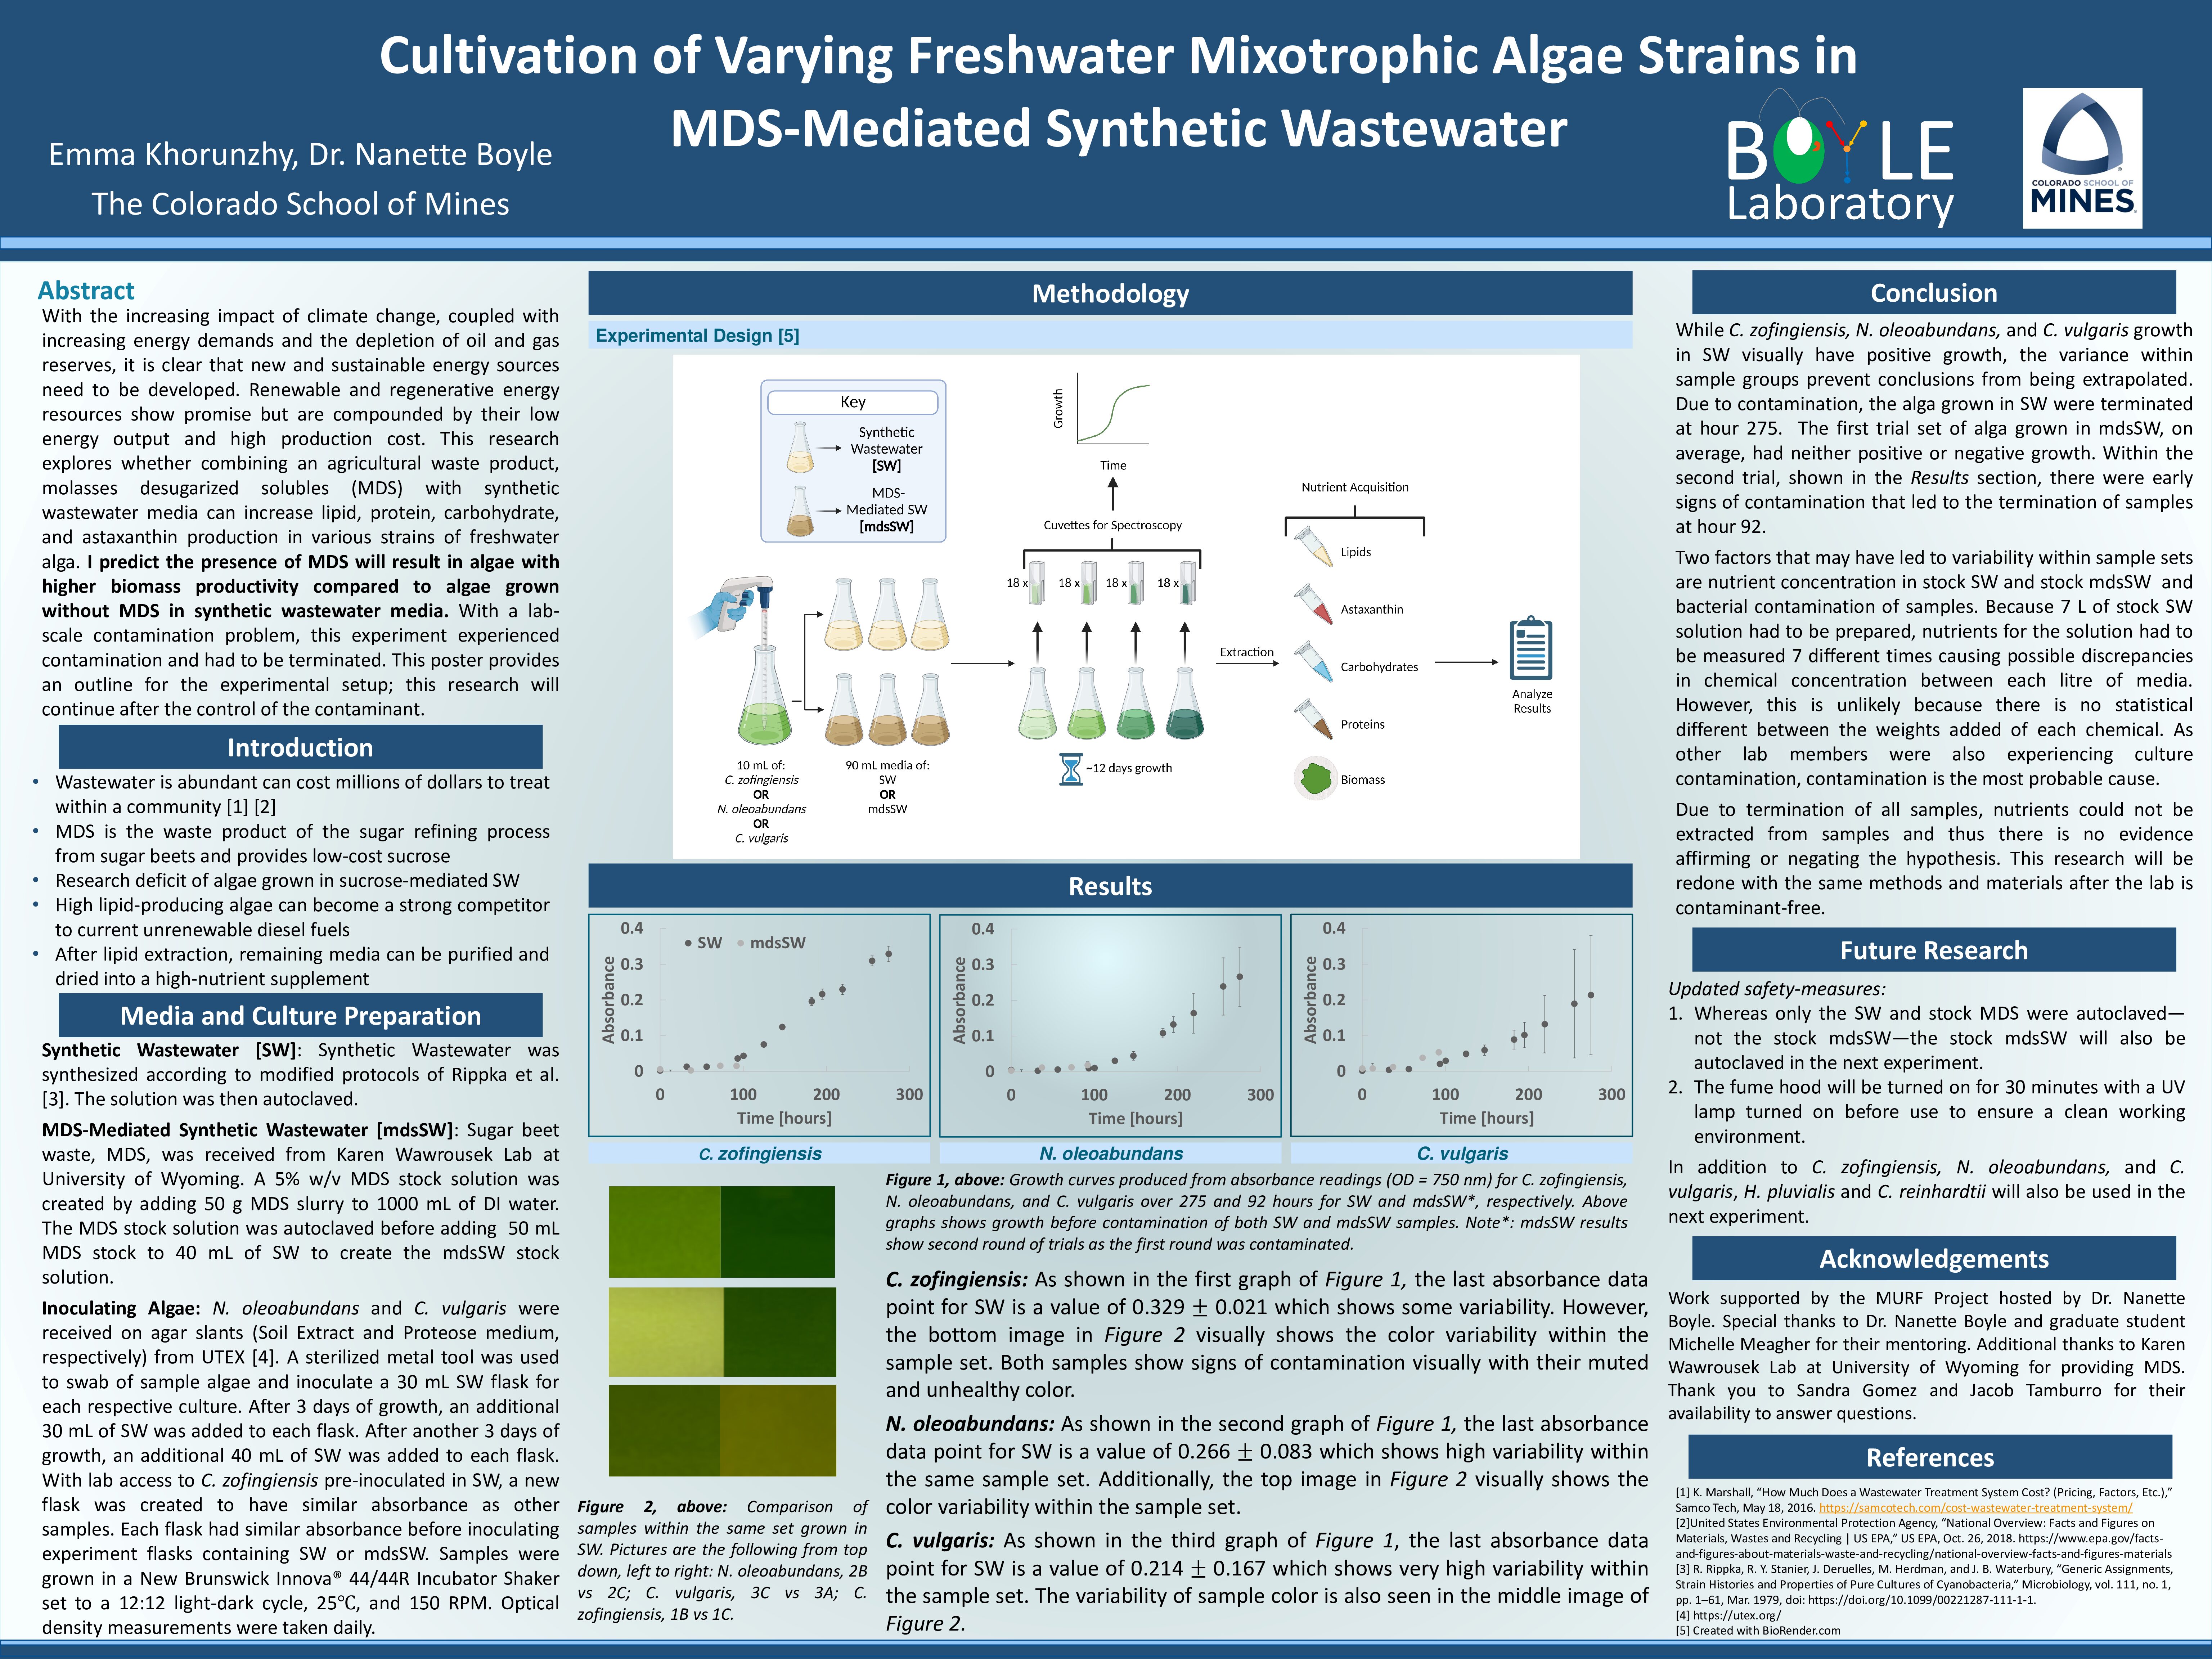 P32 Cultivation of Varying Freshwater Mixotrophic Algae Strains in  MDS-Mediated Synthetic Wastewater